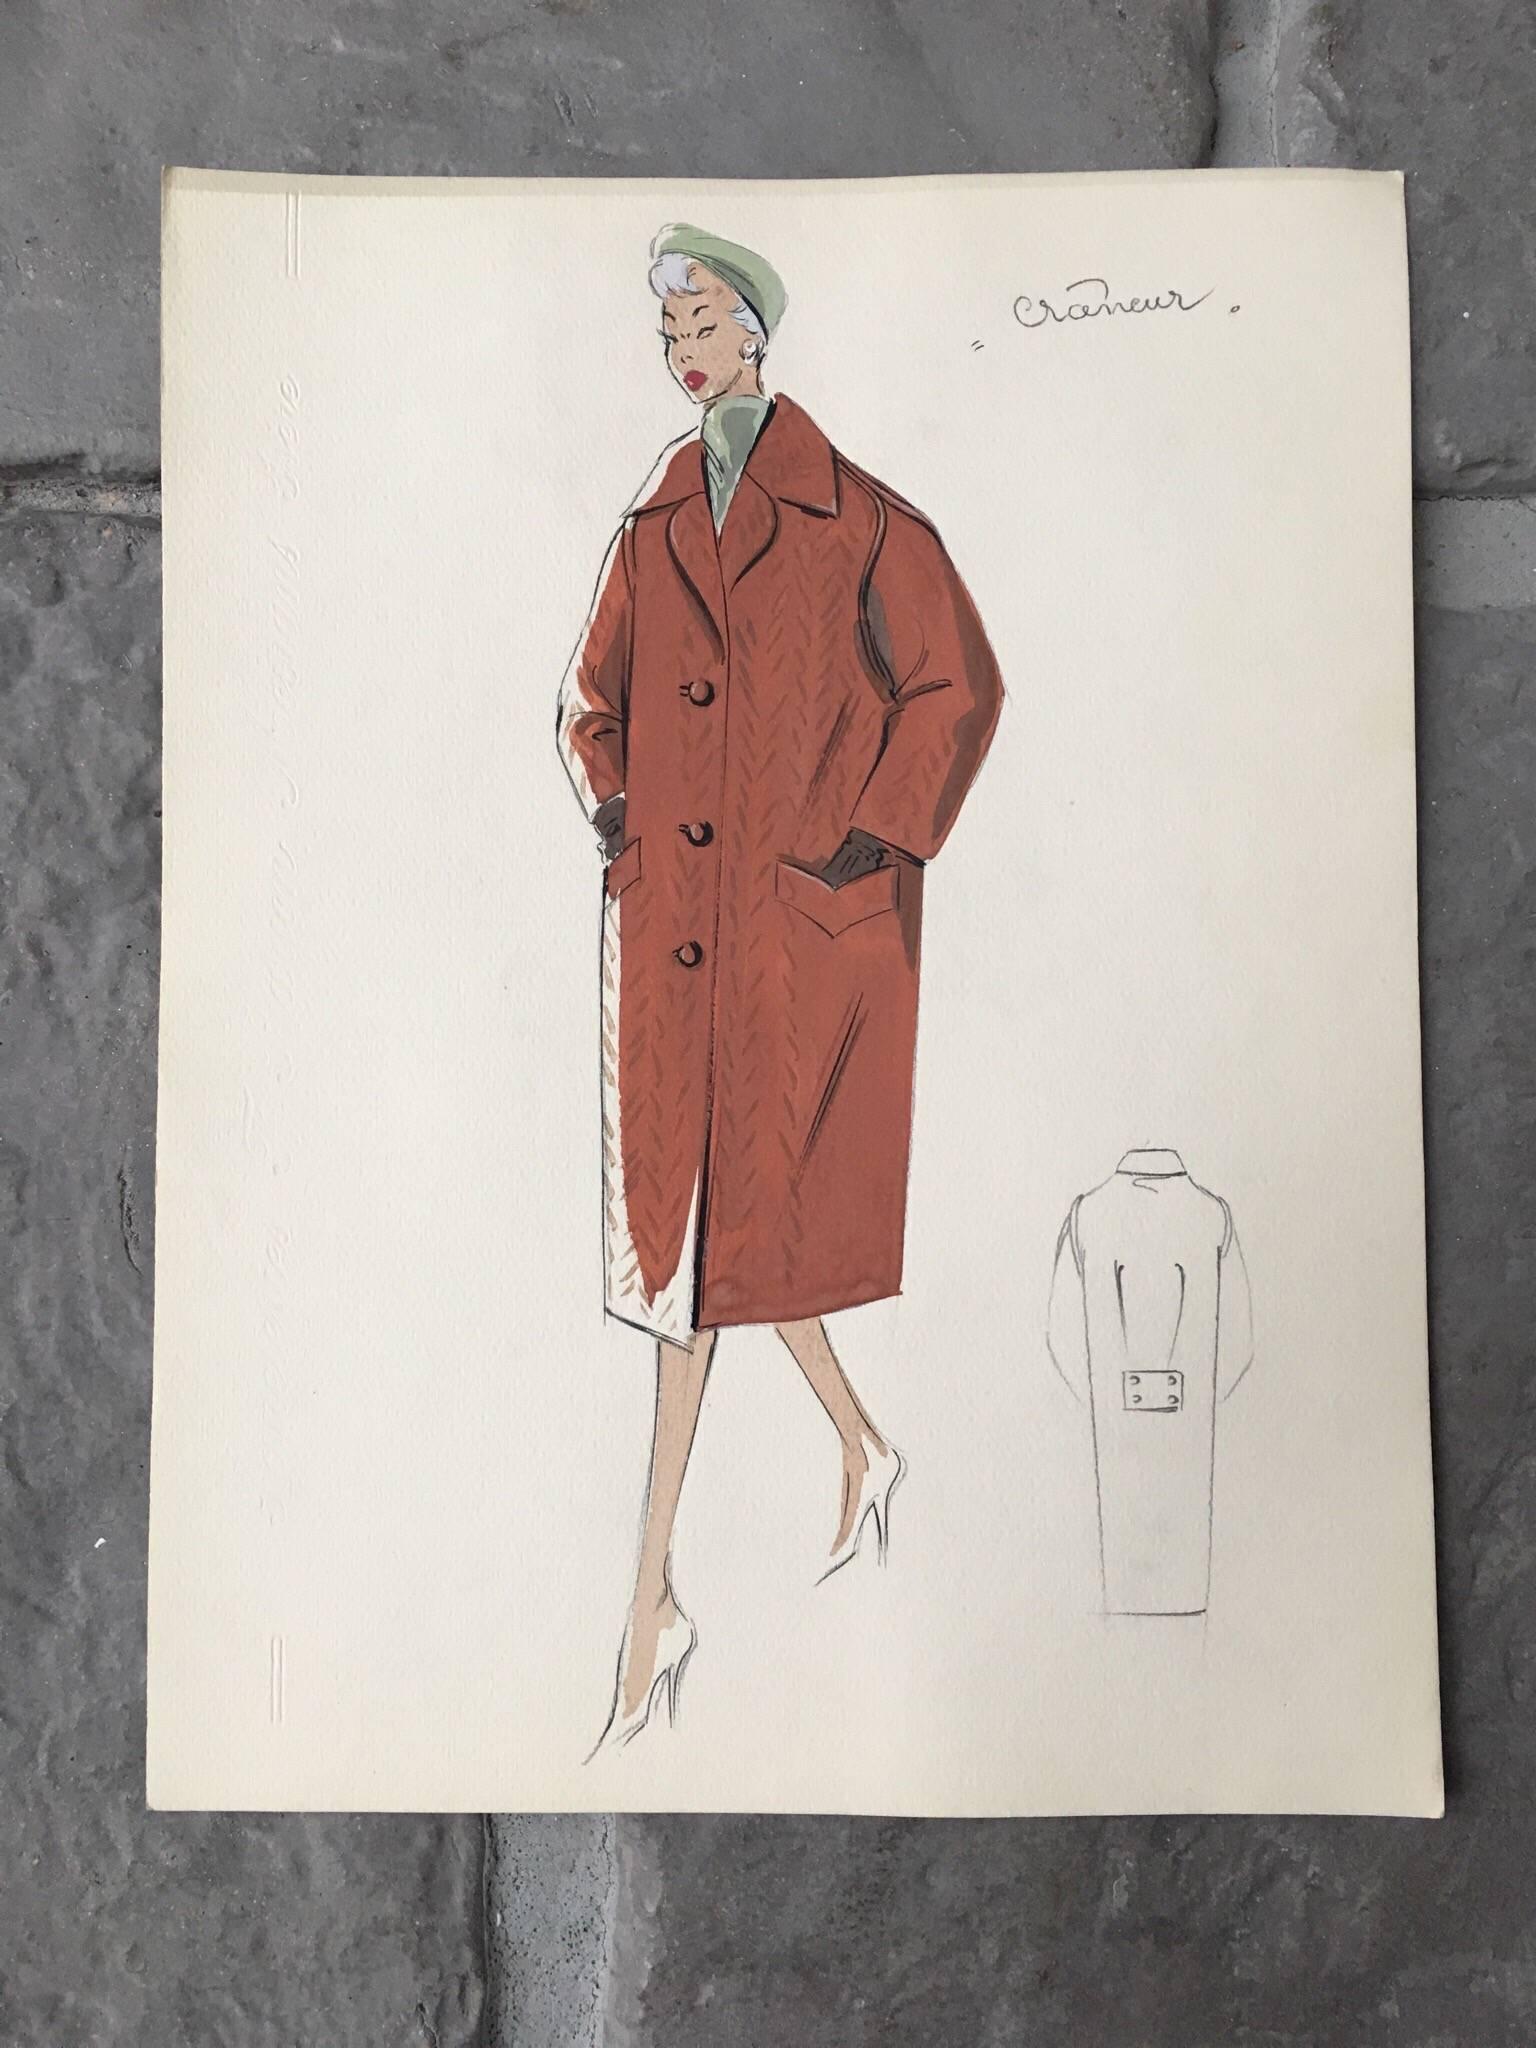 Lady in 1950's Brown Over Coat Parisian Fashion Illustration Sketch - Painting by Unknown